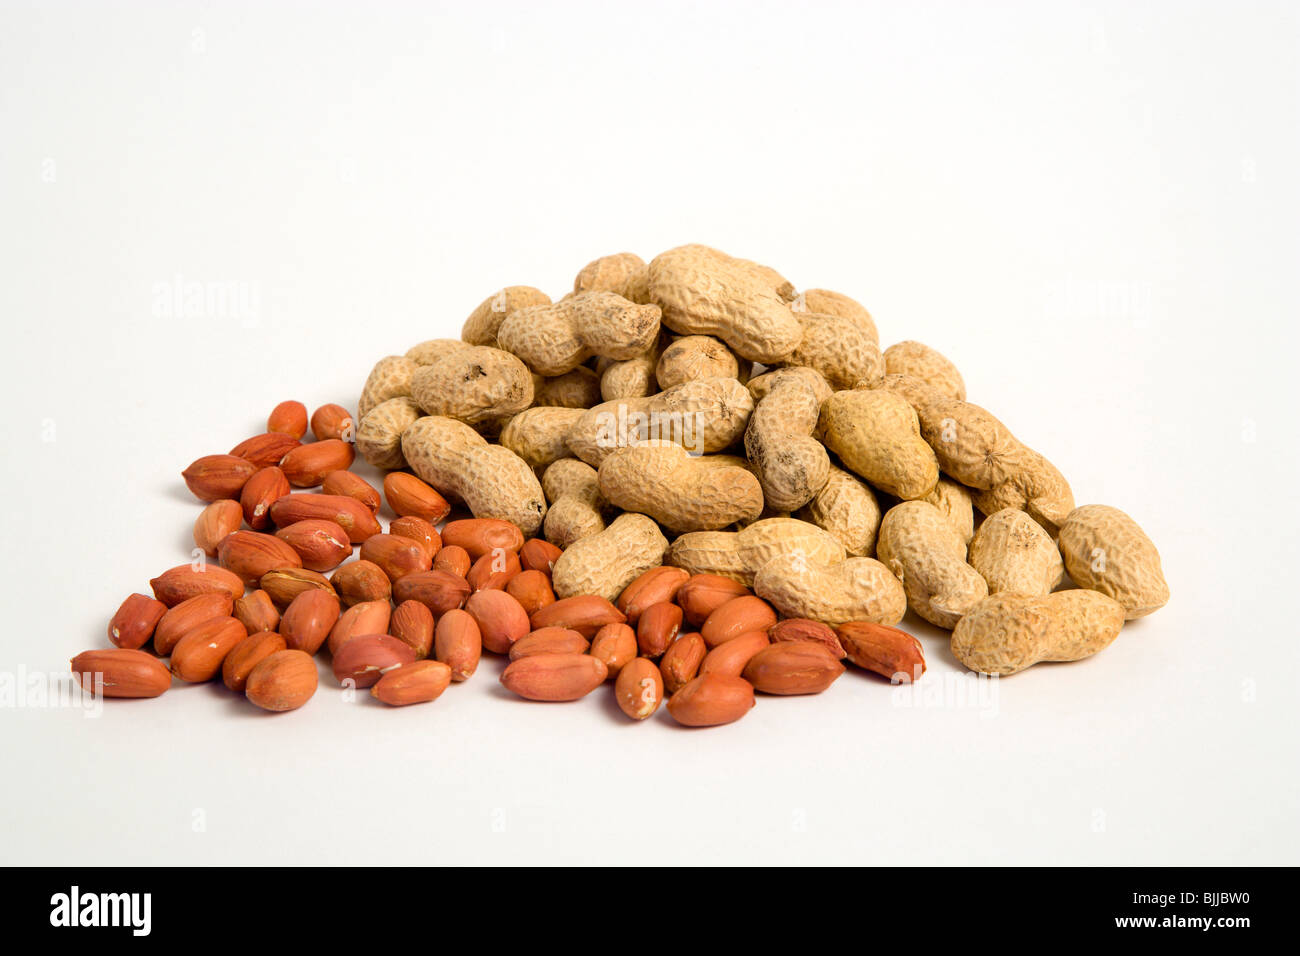 USA, Food, Nuts, Groundnuts Peanuts and kernels or shells on a white background. Stock Photo